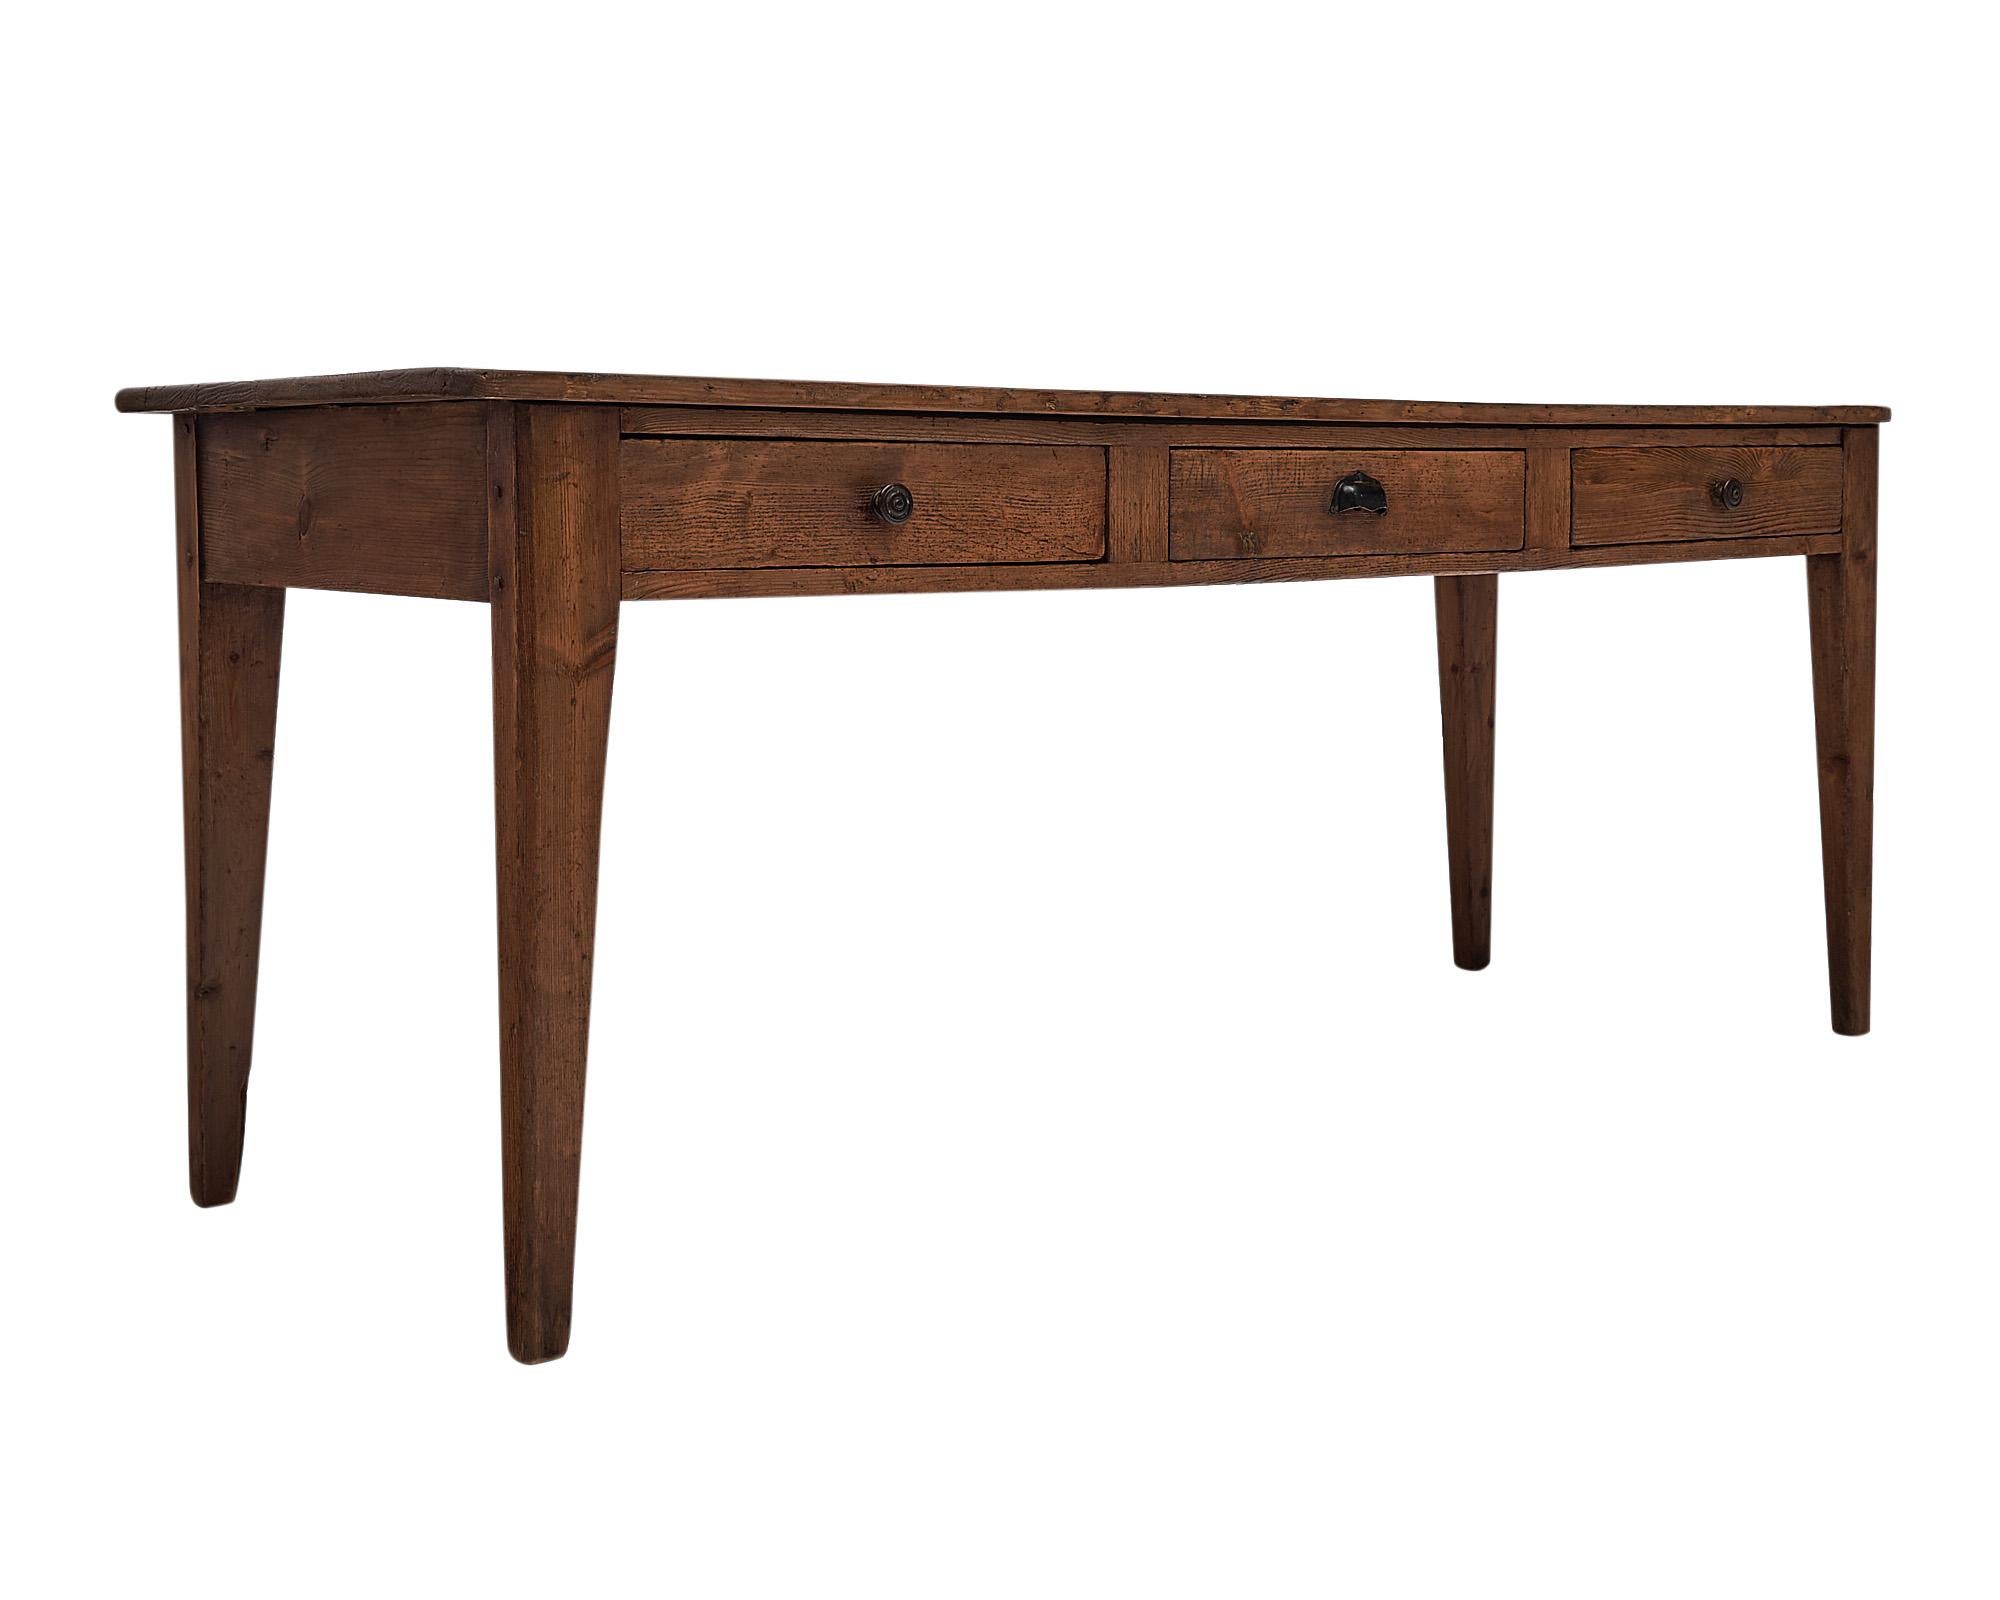 Farm table, French, from the Rhone Valley. This piece is made of fir and has strong tapered legs. The planked top is supported by a base with three dovetailed drawers down one side, as was customary on these functional farm tables. It has a lovely